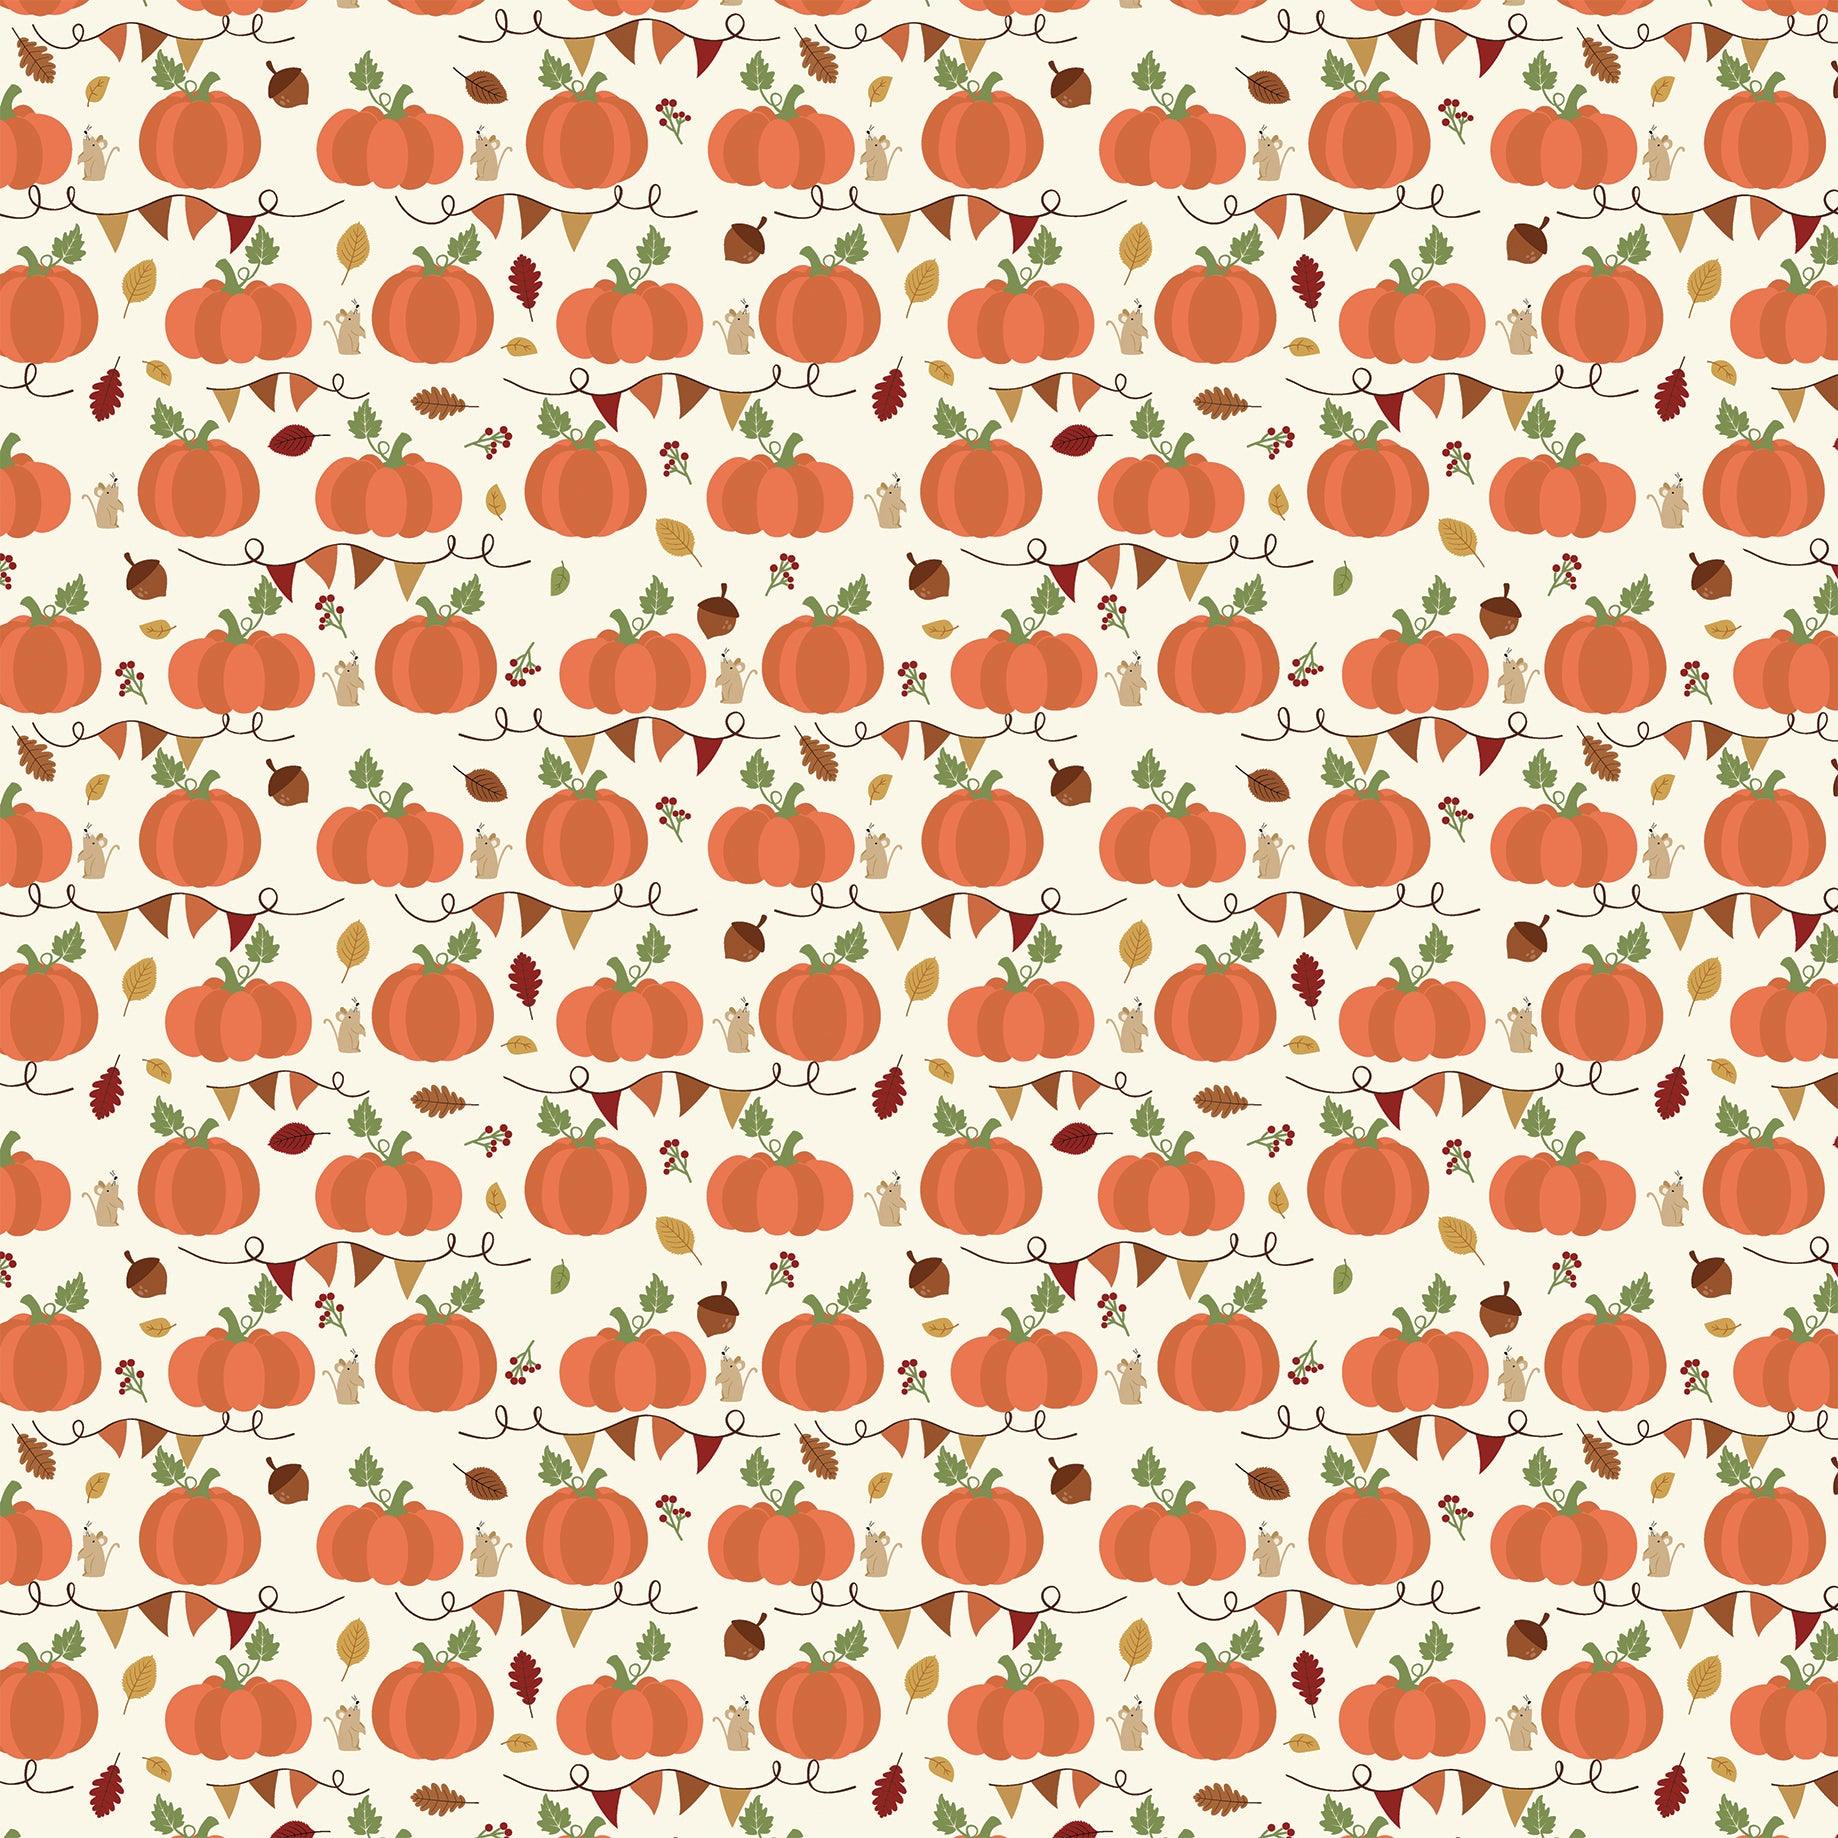 I Love Fall Collection Plump Pumpkins 12 x 12 Double-Sided Scrapbook Paper by Echo Park Paper - Scrapbook Supply Companies